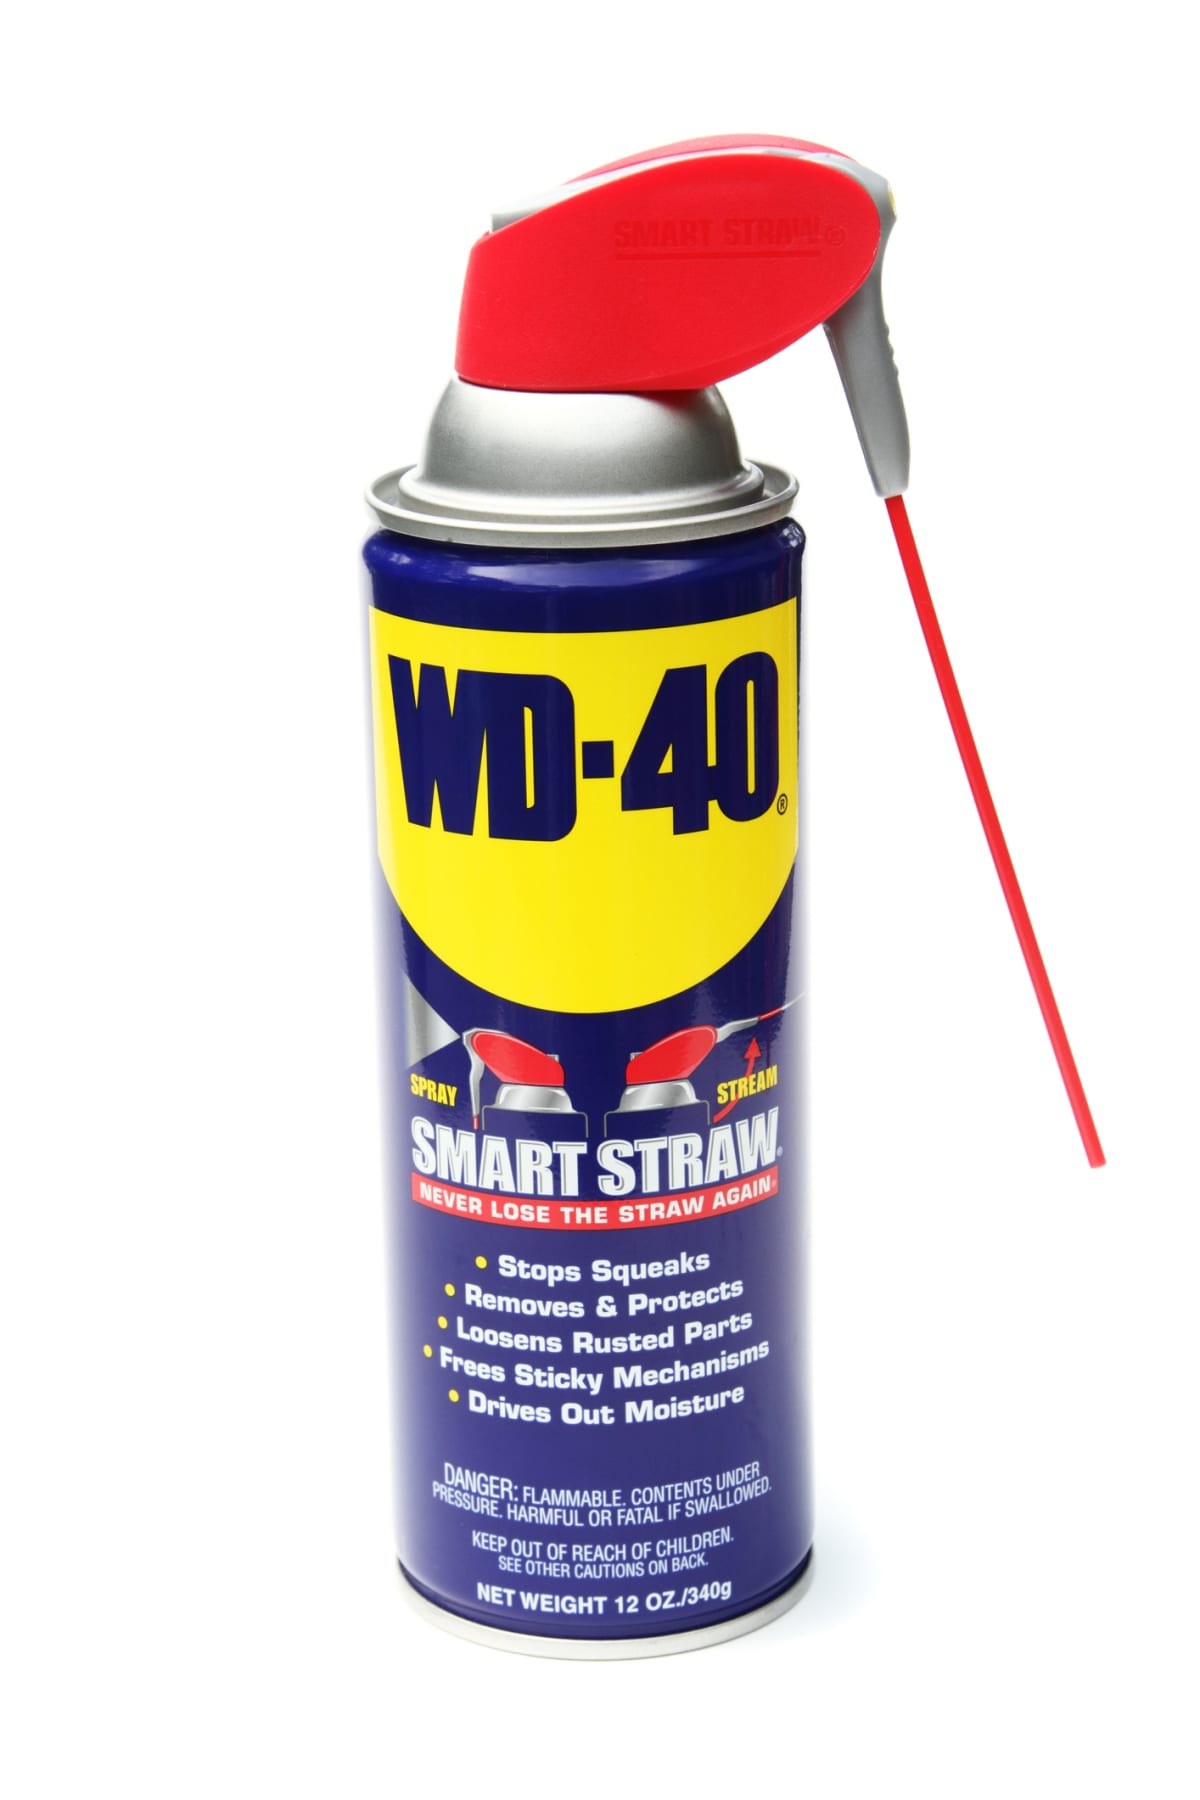 WD 40 Hacks - 13 clever WD 40 uses (not just for degreasing